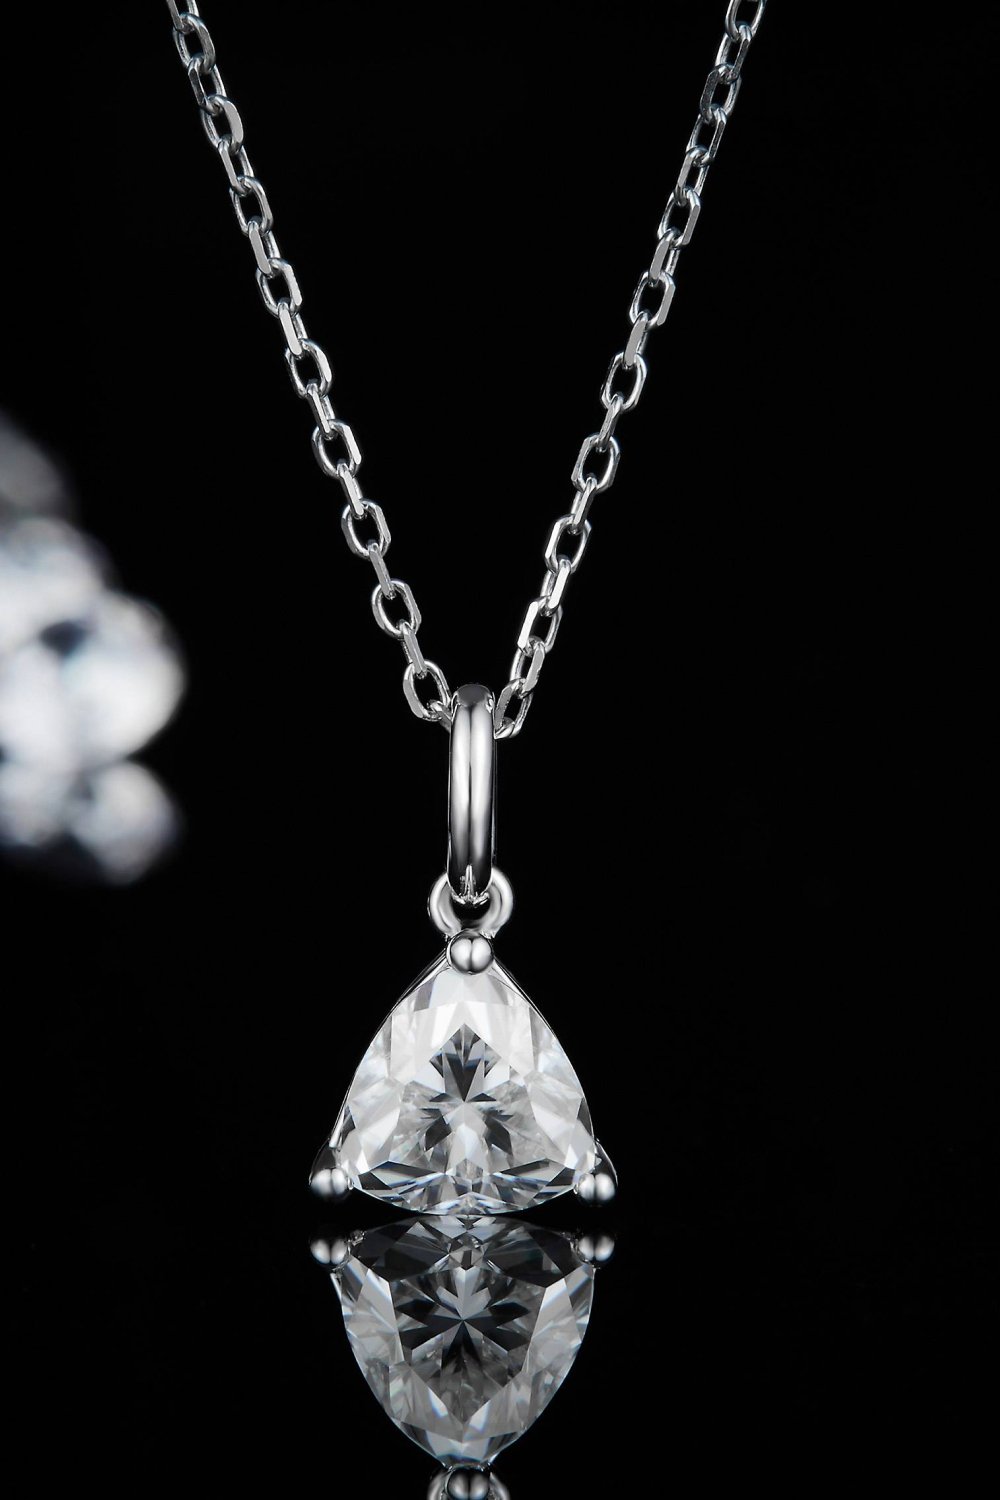 1 Carat Moissanite Pendant 925 Sterling Silver Necklace - Analia's Boutiques -